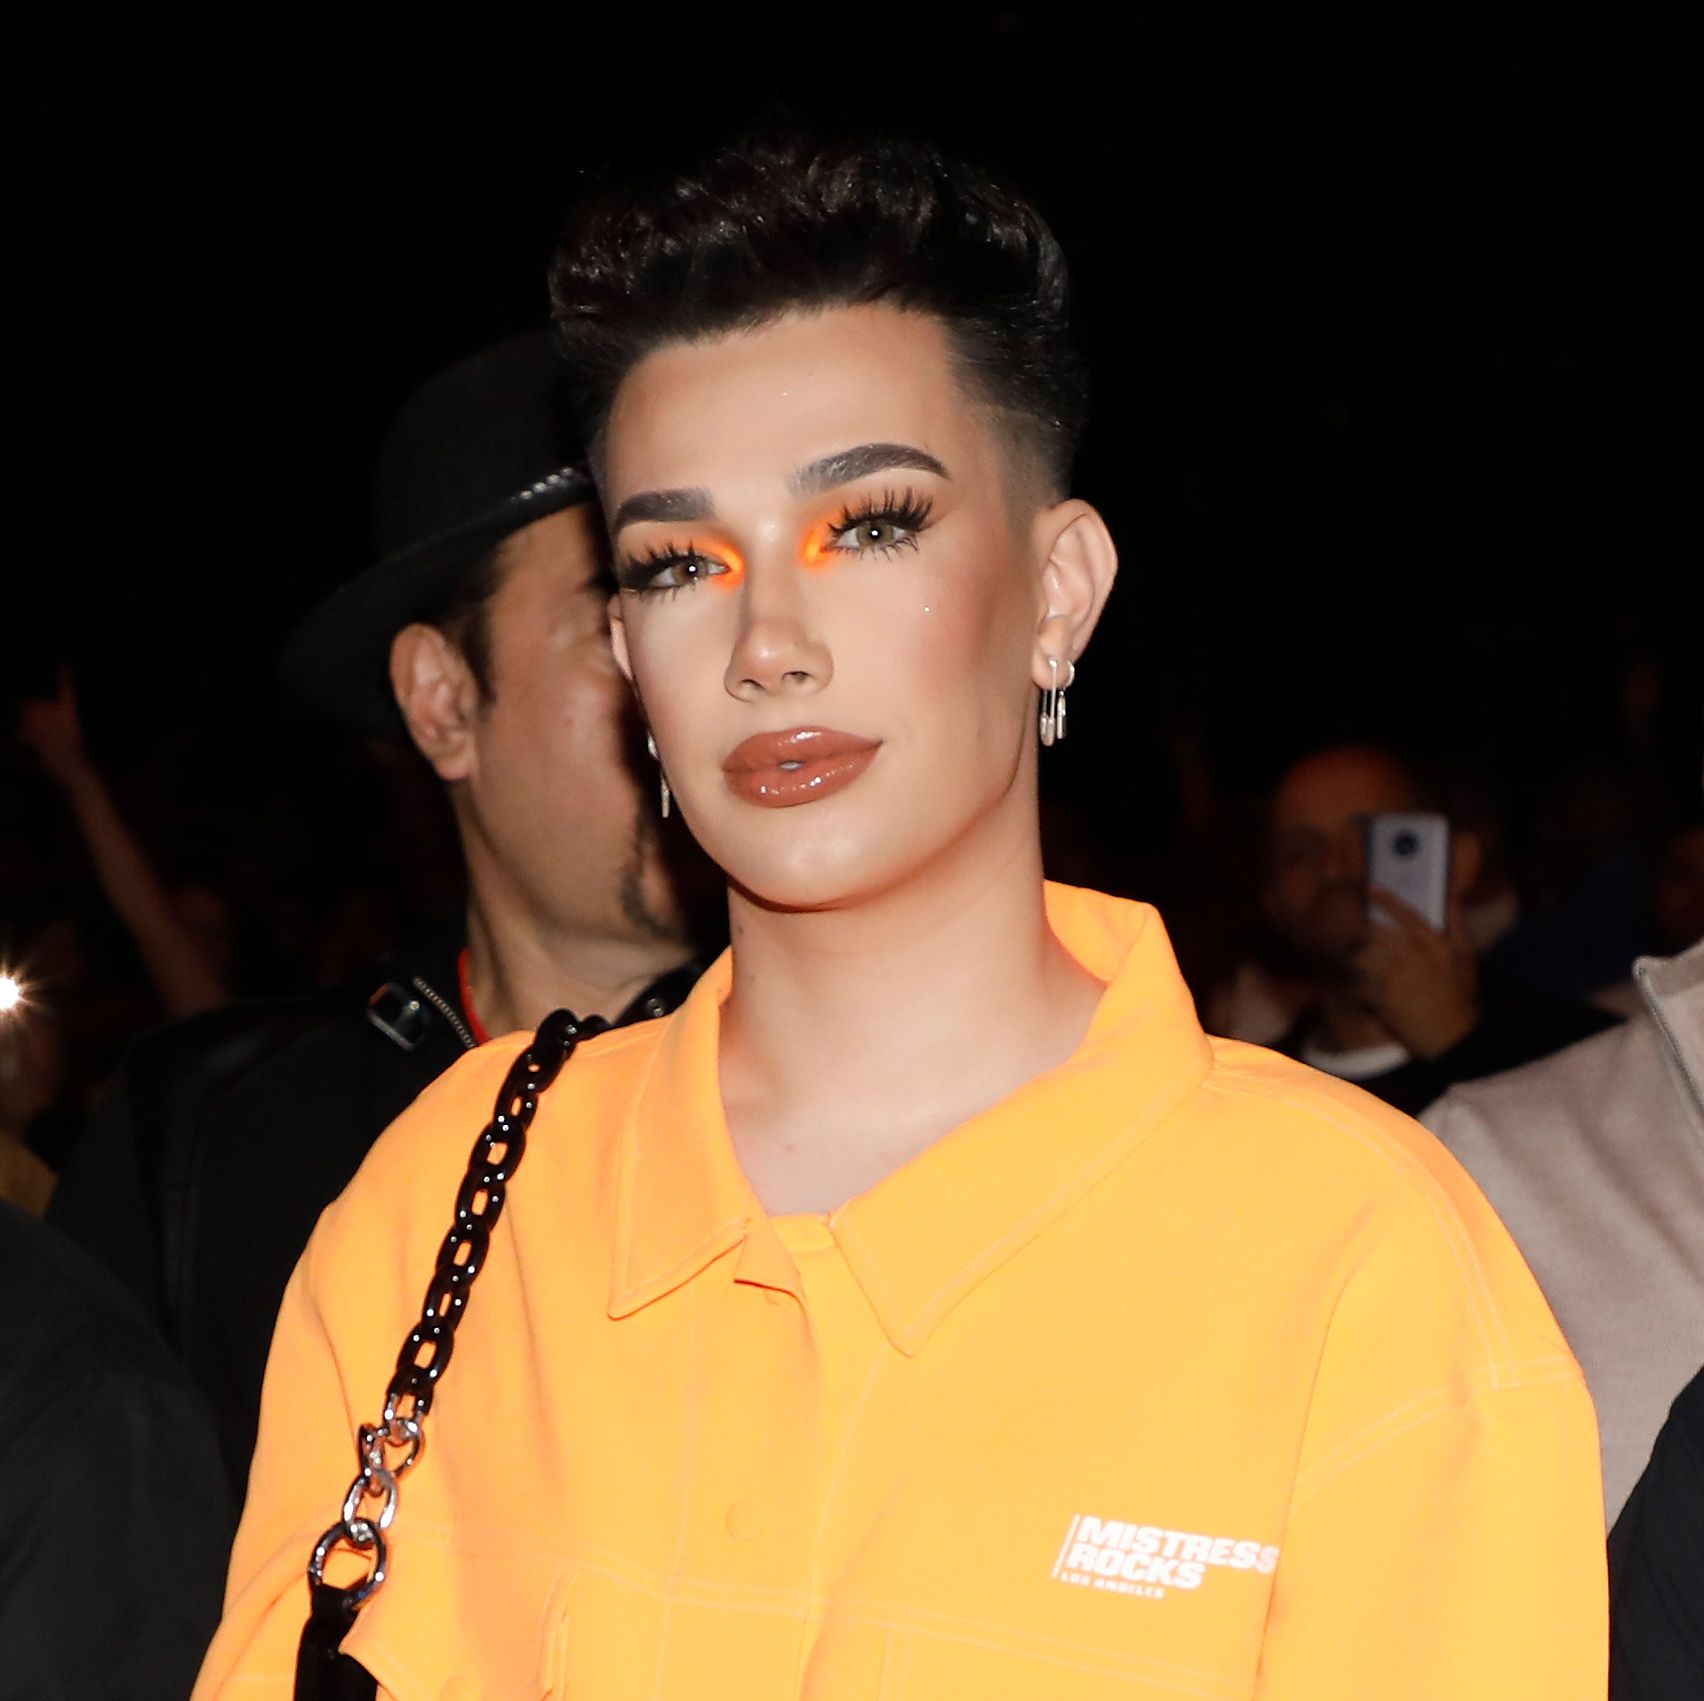 James Charles' ex-employee speaks out about working for him